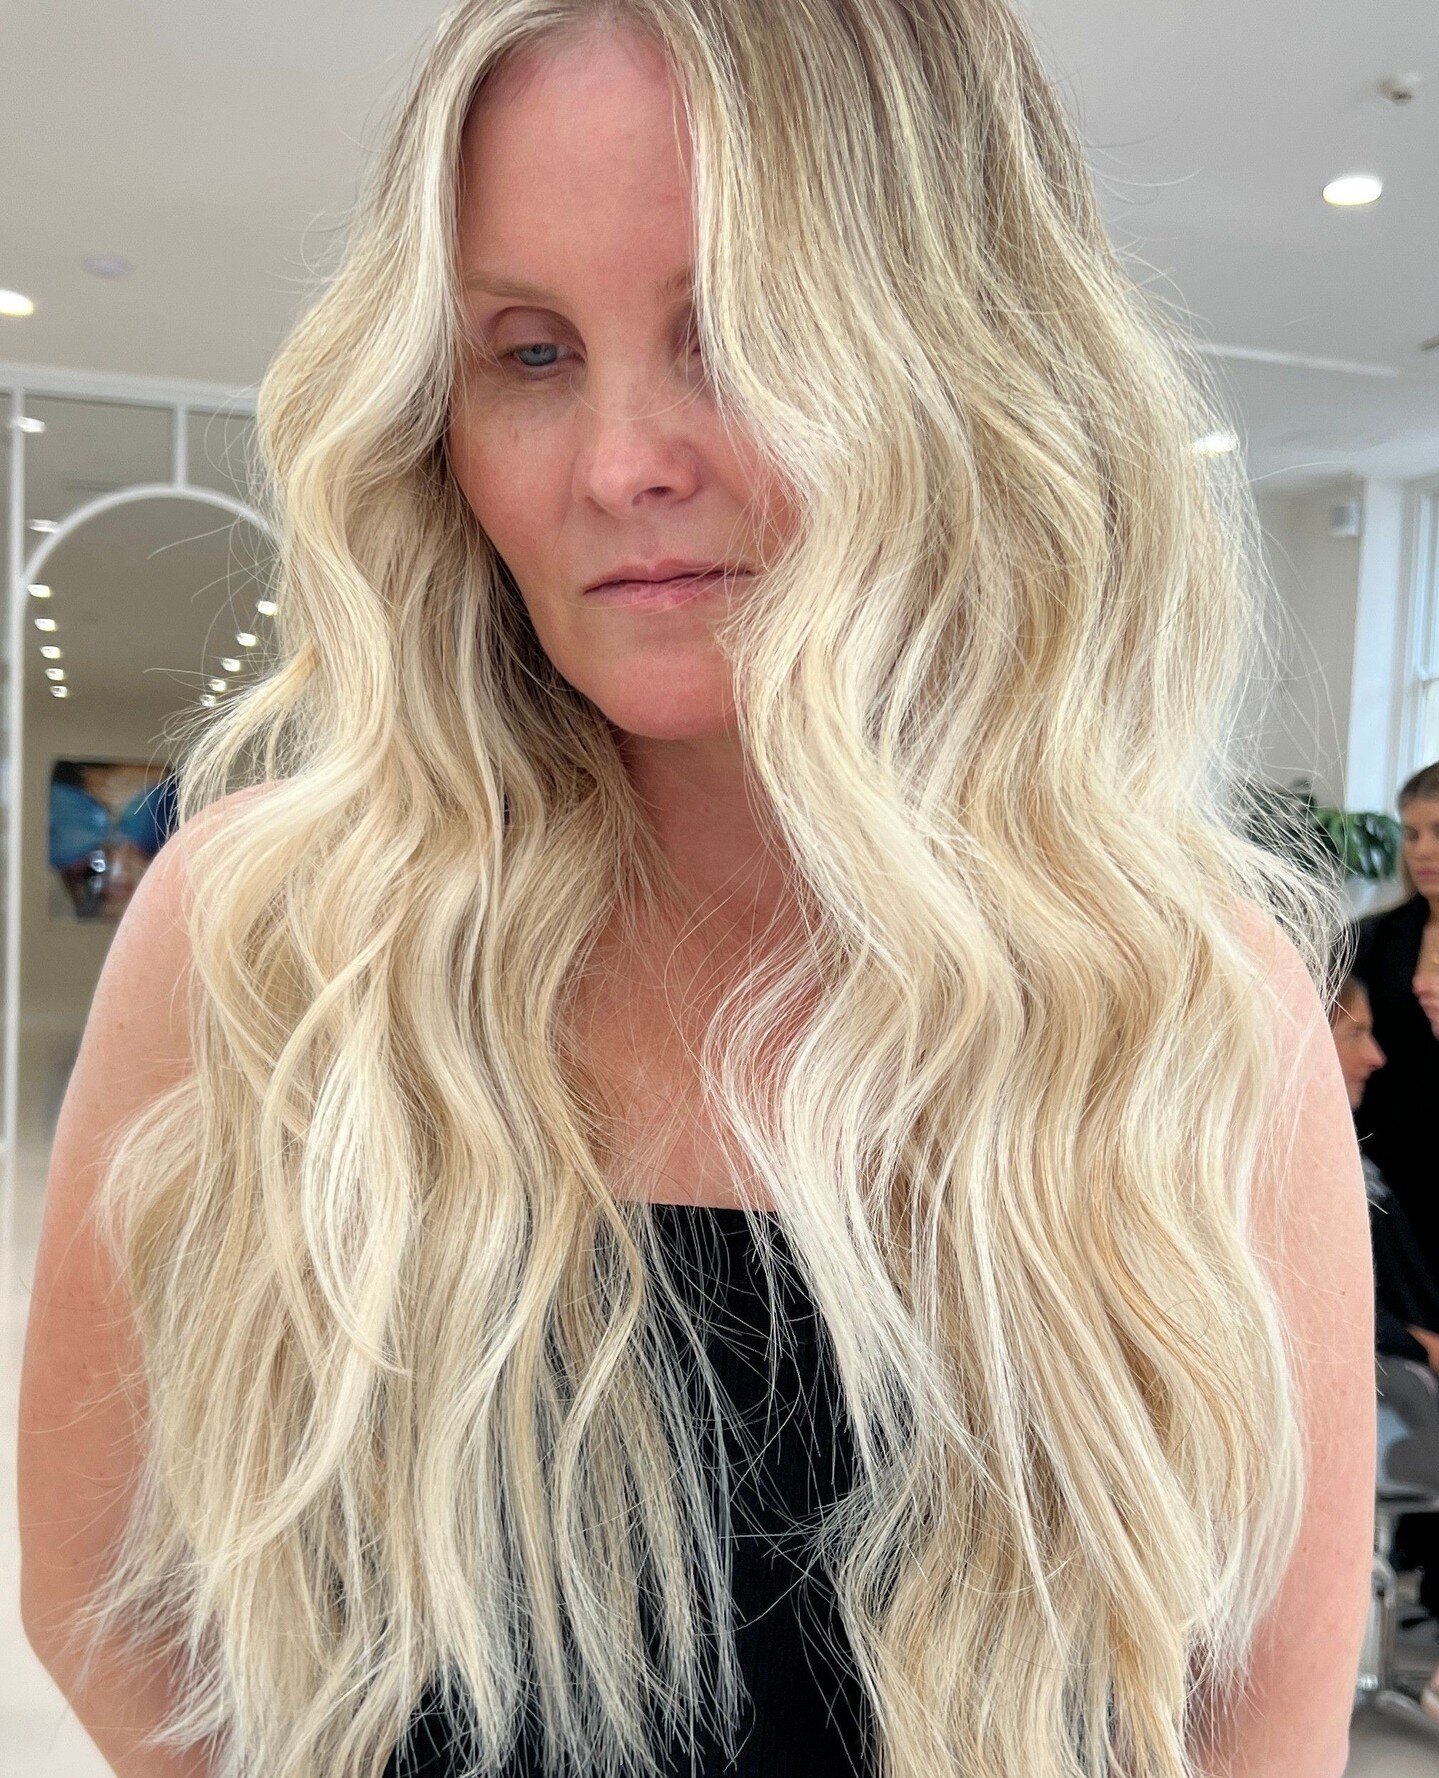 Keratin bond hair extensions - the process with @greatlengthsaus ✨⁠
⁠
Length - 50cm⁠
Bonds - 120⁠
Time - 3.5 hours⁠
Longevity - 3-6 months⁠
Custom blended colour with our extension specialist @ambah.tnb⁠
⁠
⁠
Book your hair extensions consult via the 